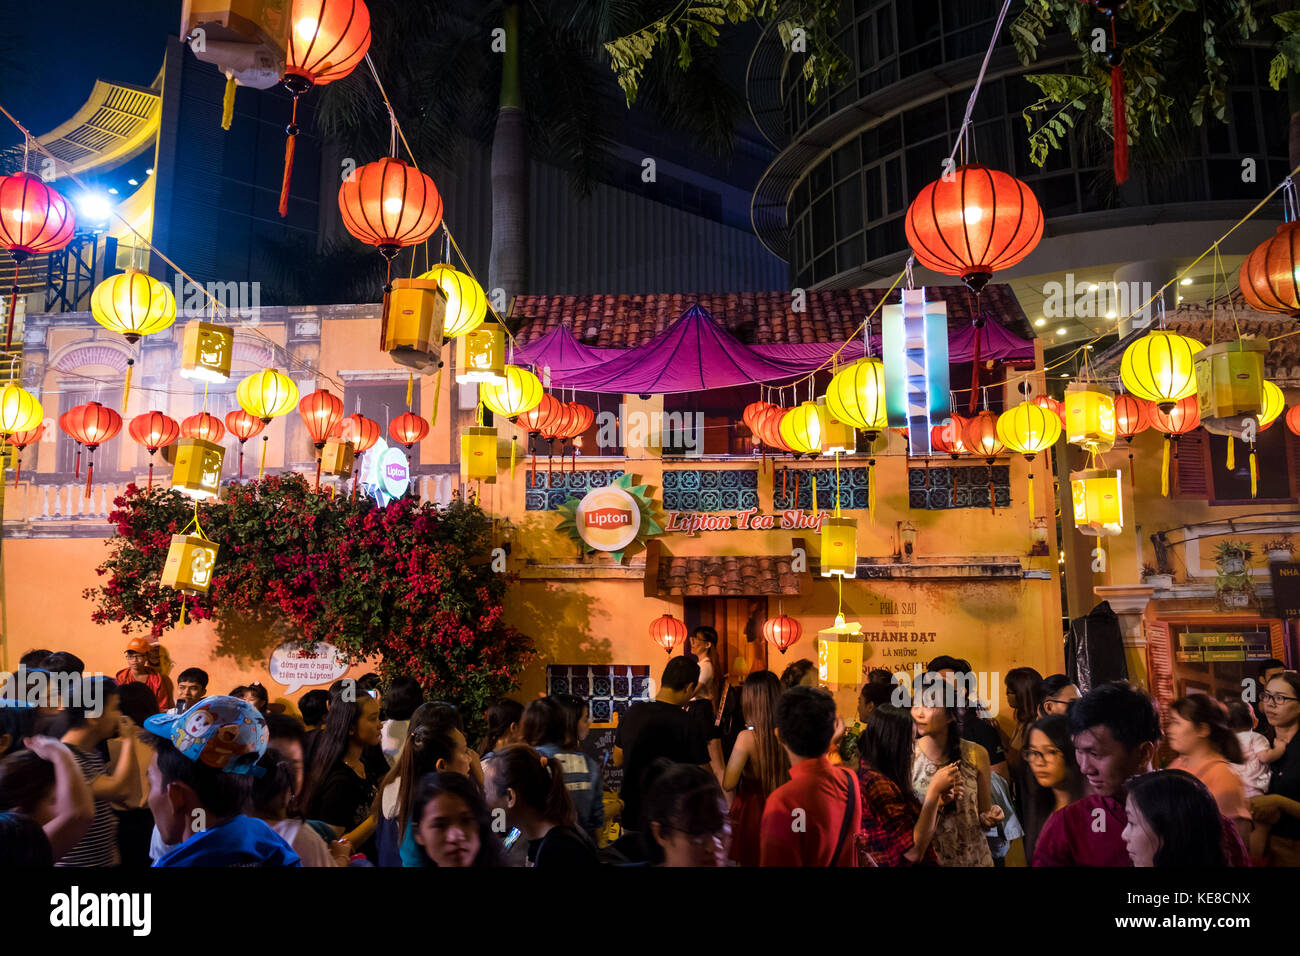 Ho Chi Minh City, Vietnam - 02 Oct 2017 - View of the Mid-Autumn festival in District 7, Ho Chi Minh City, Vietnam Stock Photo